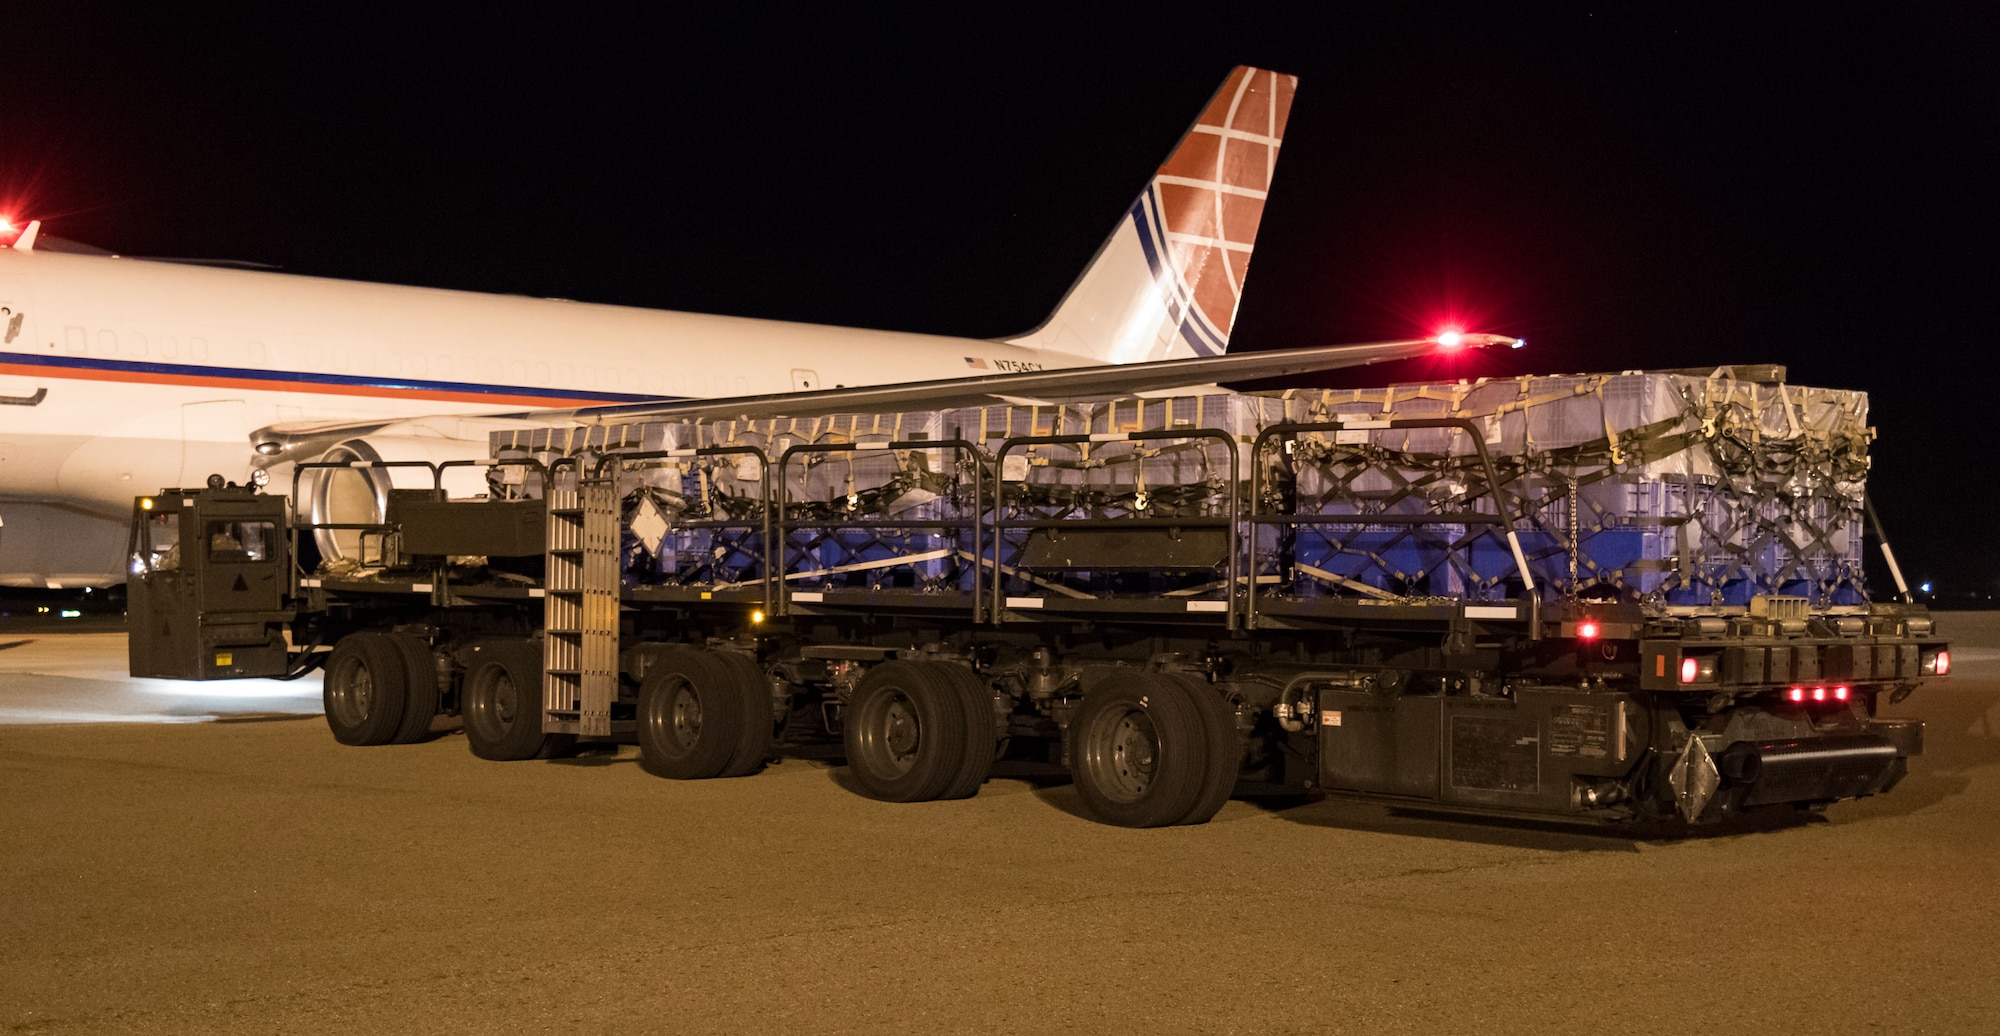 A K-loader with five pallets waits to be marshalled into position by 436th Aerial Port Squadron ramp services personnel Sept. 8, 2019, at Dover Air Force Base, Del. The Air Transport International Boeing 757-200 aircraft, part of the Civil Reserve Air Fleet program, was contracted to transport cargo pallets and 30 Team Dover members to Fairchild AFB, Wash., participating in Mobility Guardian 2019. “In support of exercise Mobility Guardian 2019, Air Mobility Command contracted commercial aircraft to simulate activating CRAF marking the first time, in a long time, AMC has exercised a commercial component of its wartime plan,” said Maj. Adam Crane, AMC Headquarters CRAF Branch Chief, Scott AFB, Ill. (U.S. Air Force photo by Roland Balik)